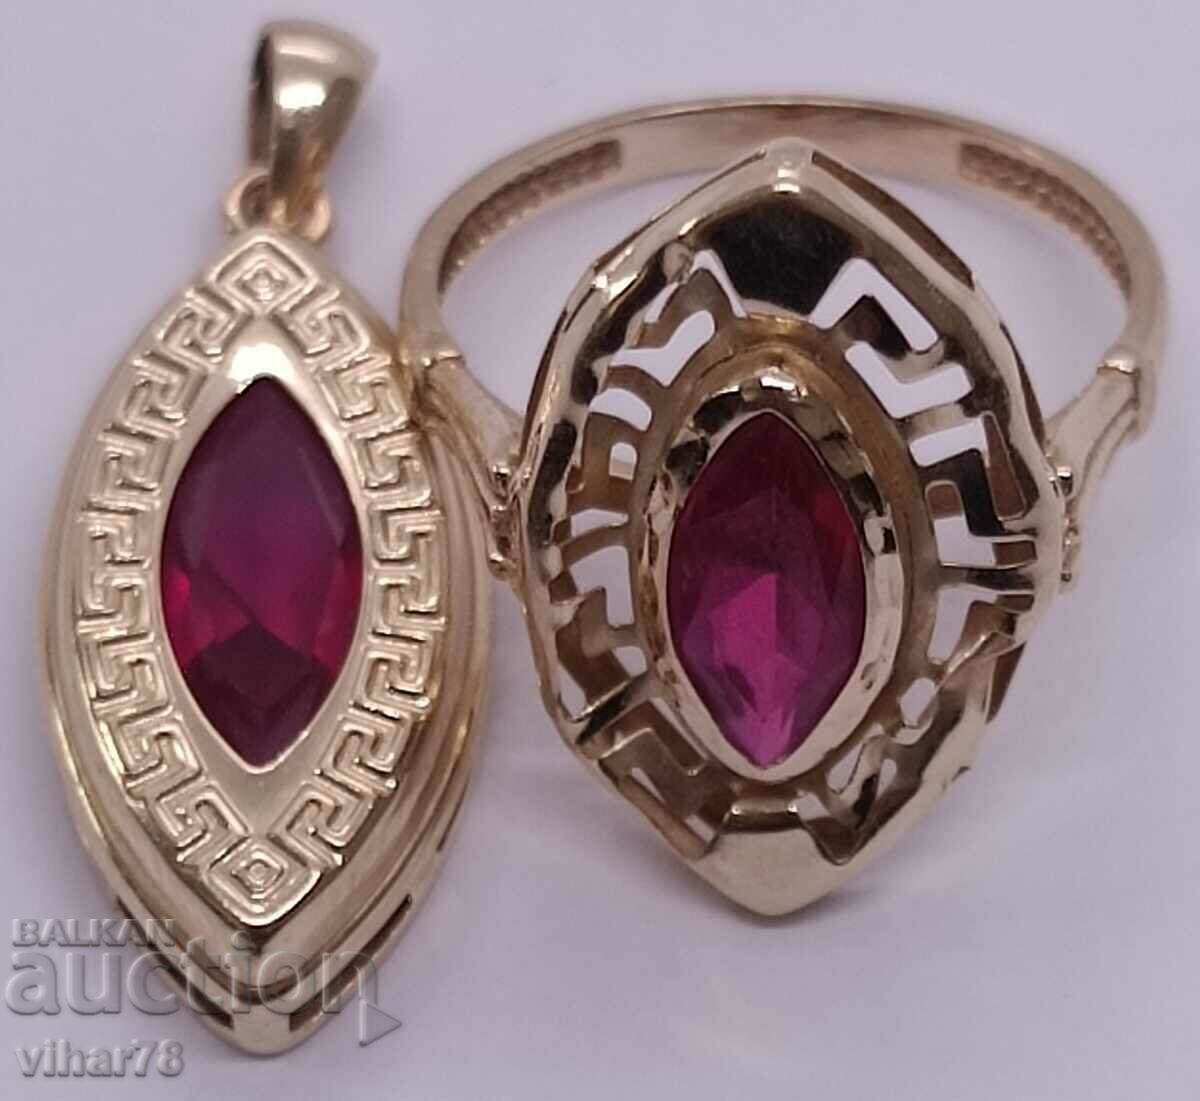 Beautiful 14k gold ring and pendant